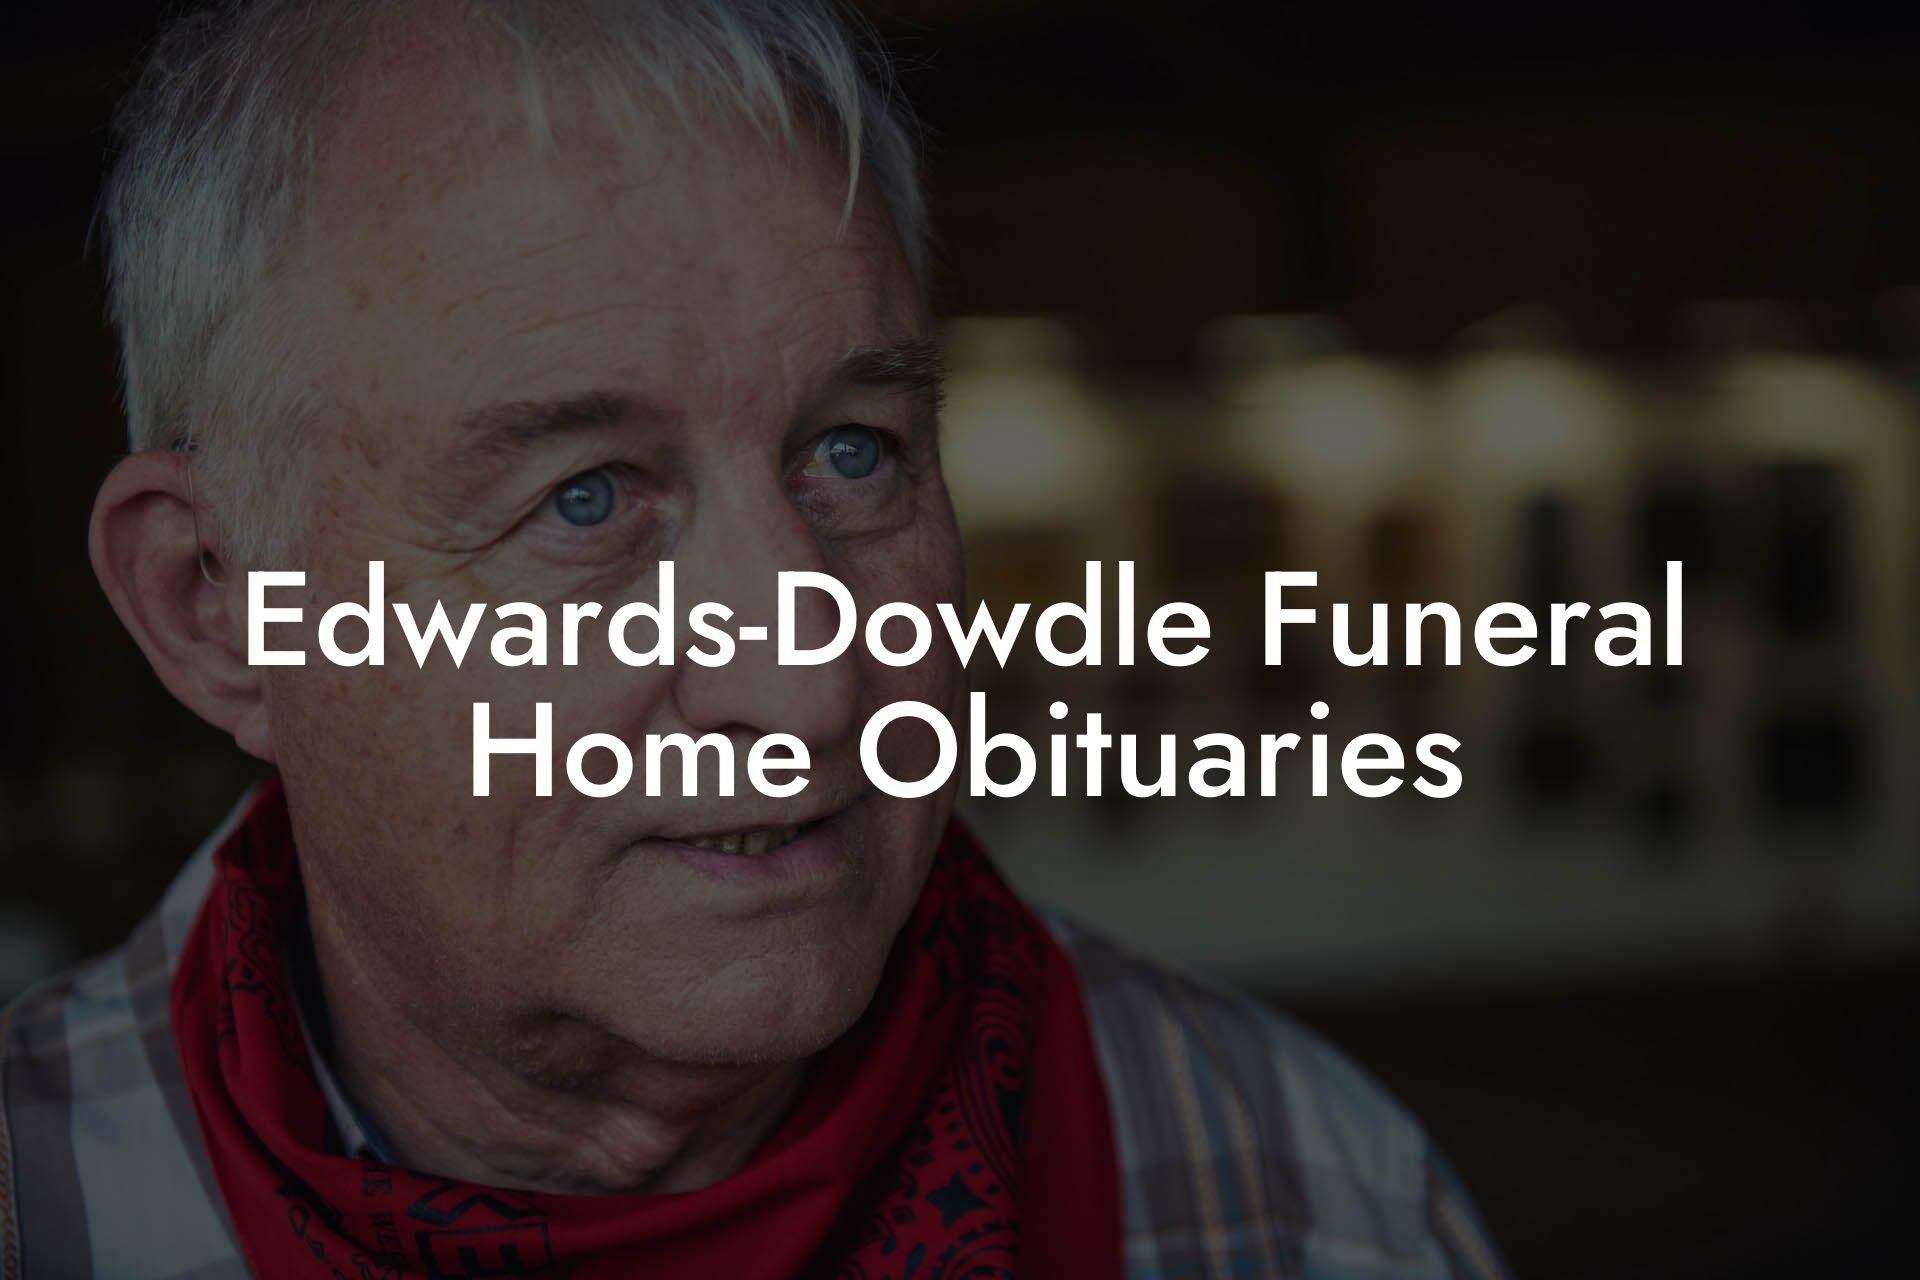 Edwards-Dowdle Funeral Home Obituaries